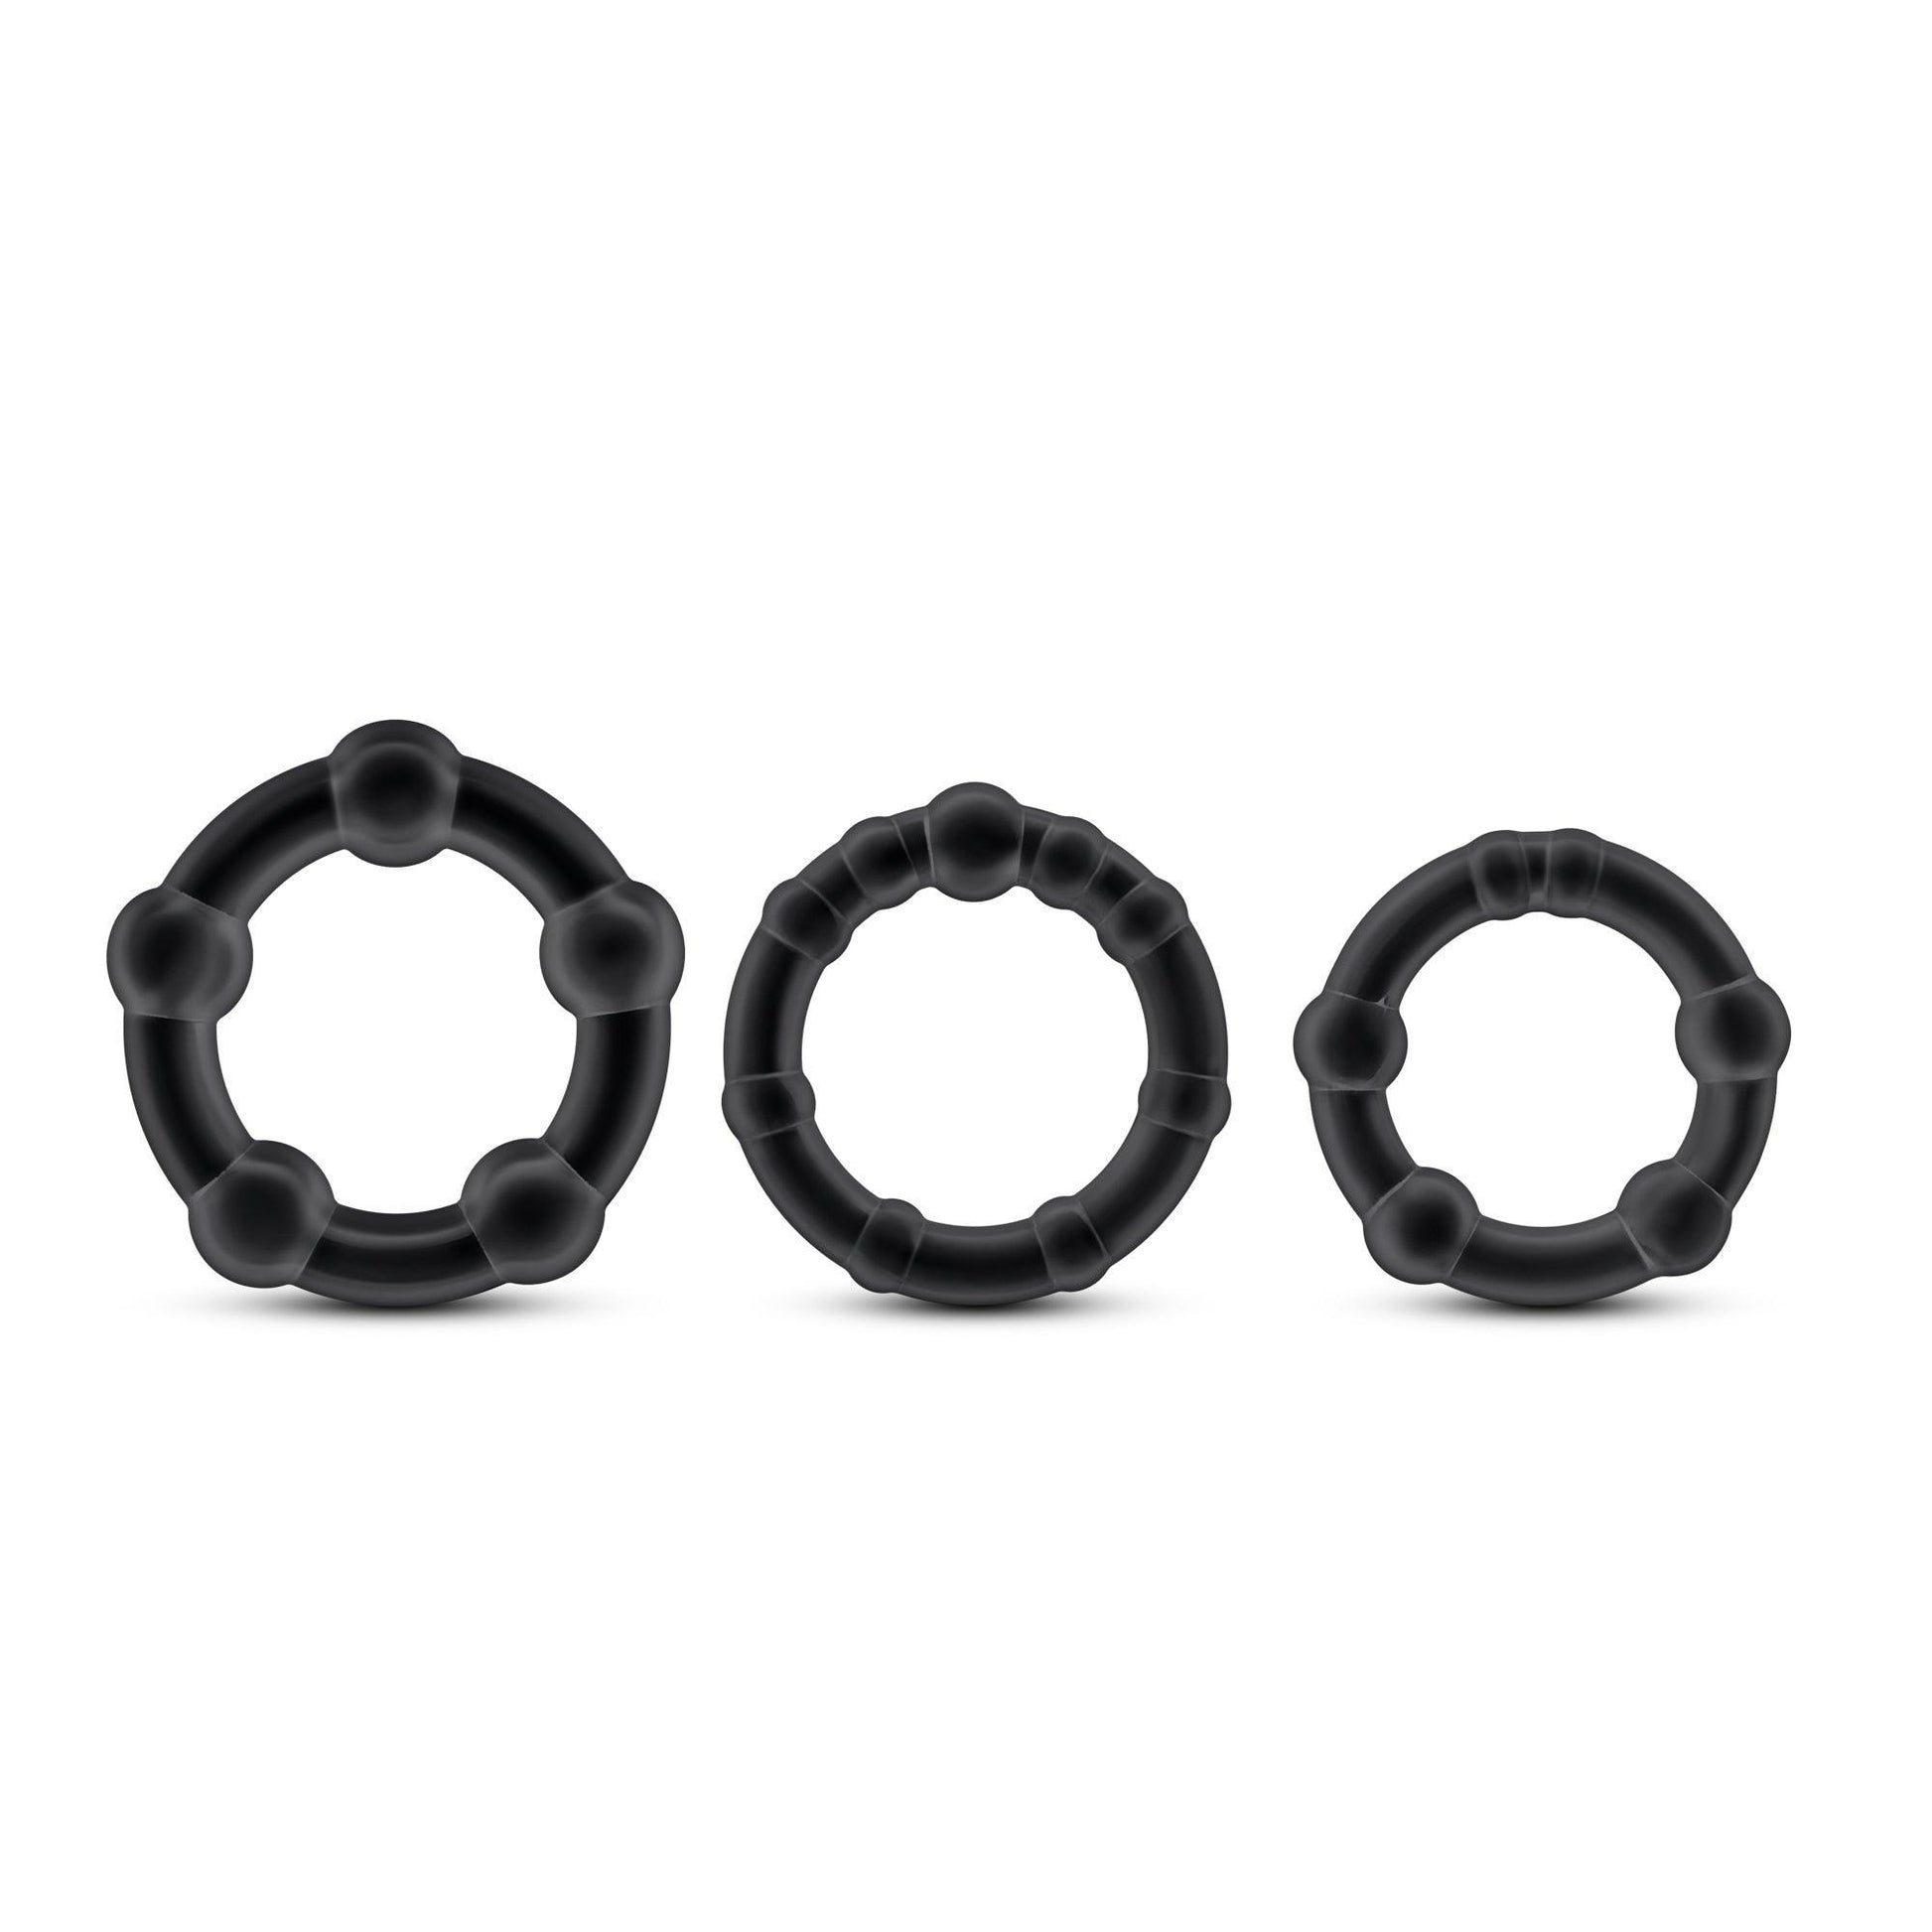 Stay Hard - Beaded Cock Rings - 3 Pack - Black - My Sex Toy Hub